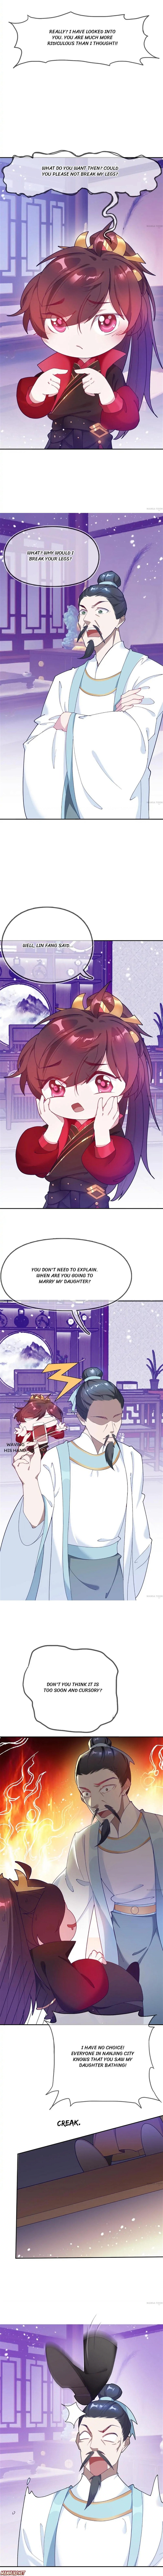 Super Spendthrift Chapter 20 - Page 4